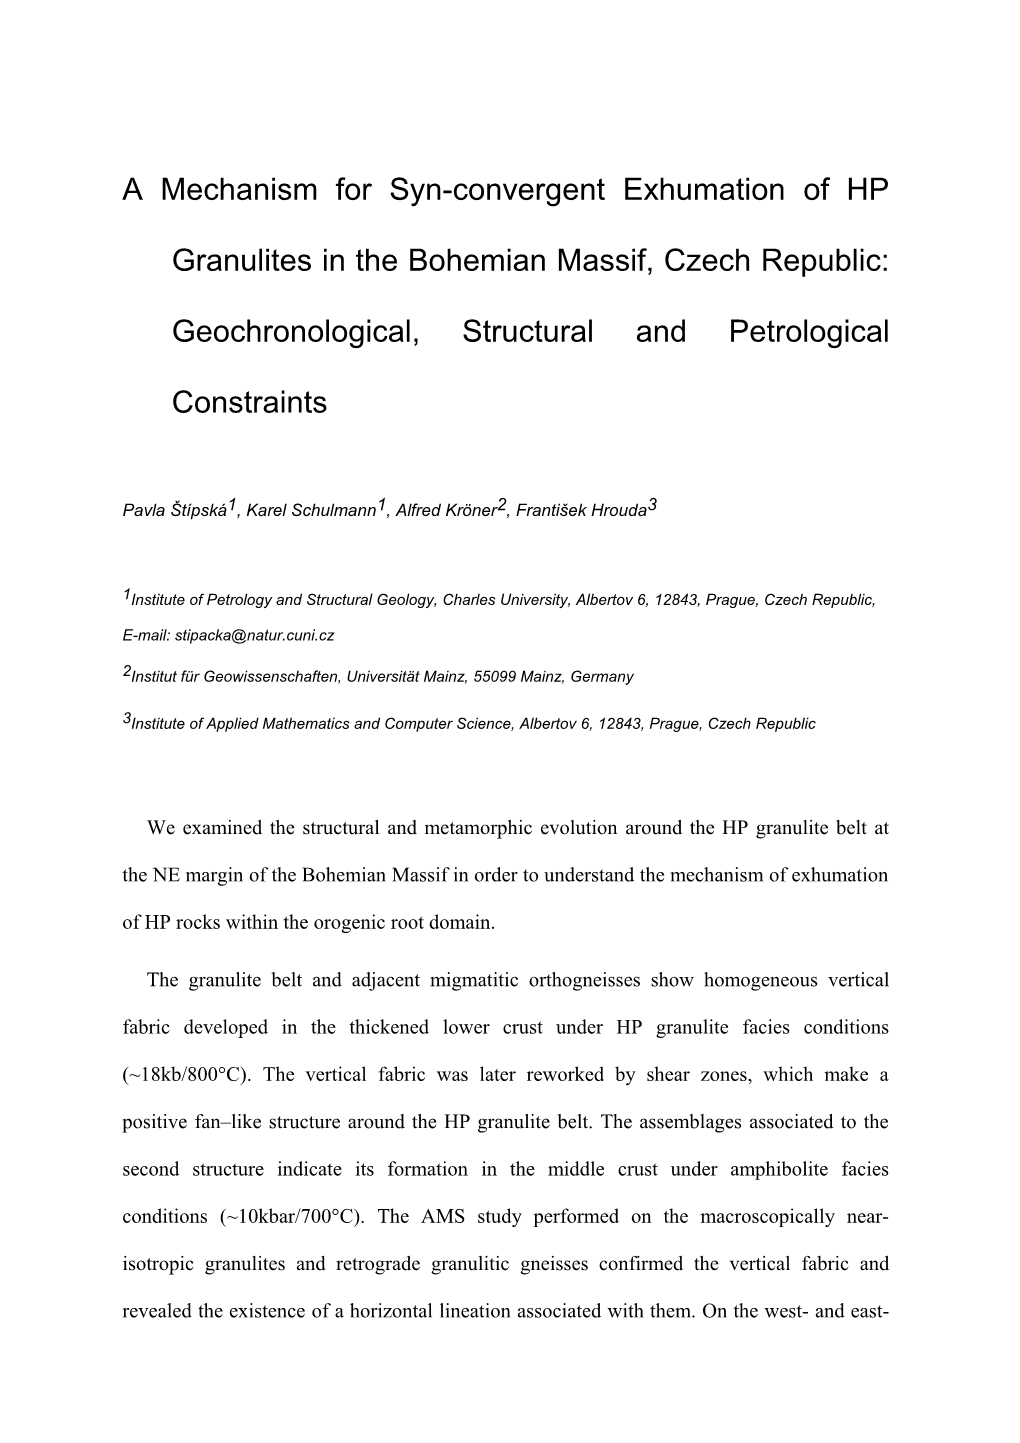 A Mechanism for Syn-Convergent Exhumation of HP Granulites in the Bohemian Massif, Czech